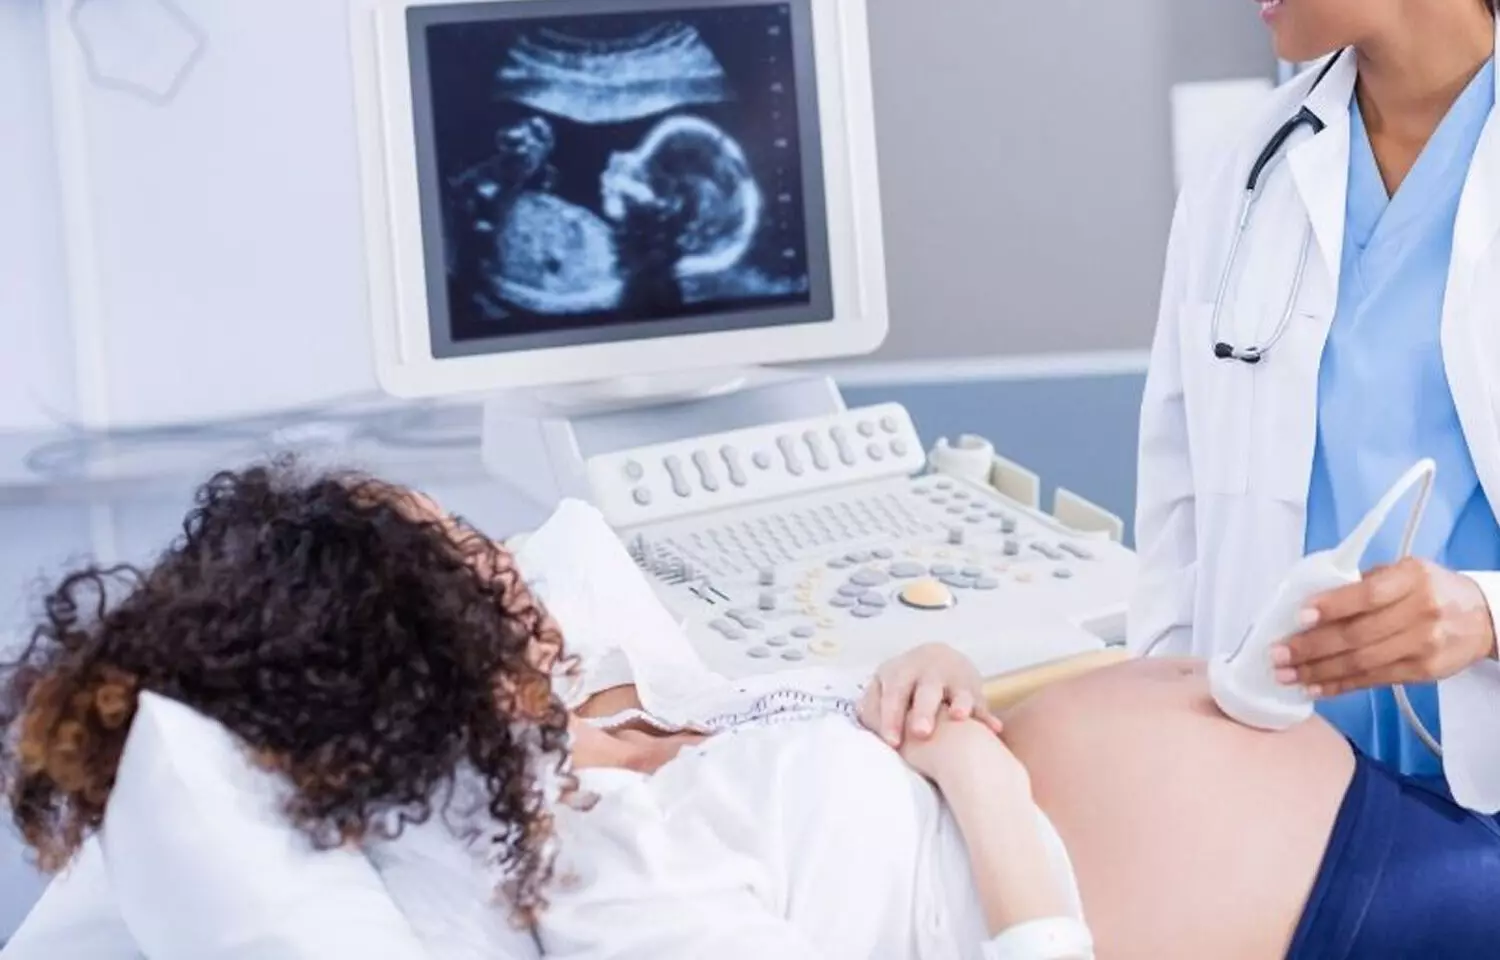 New ultrasound technique can detect impaired fetal blood flow in early pregnancy: Study